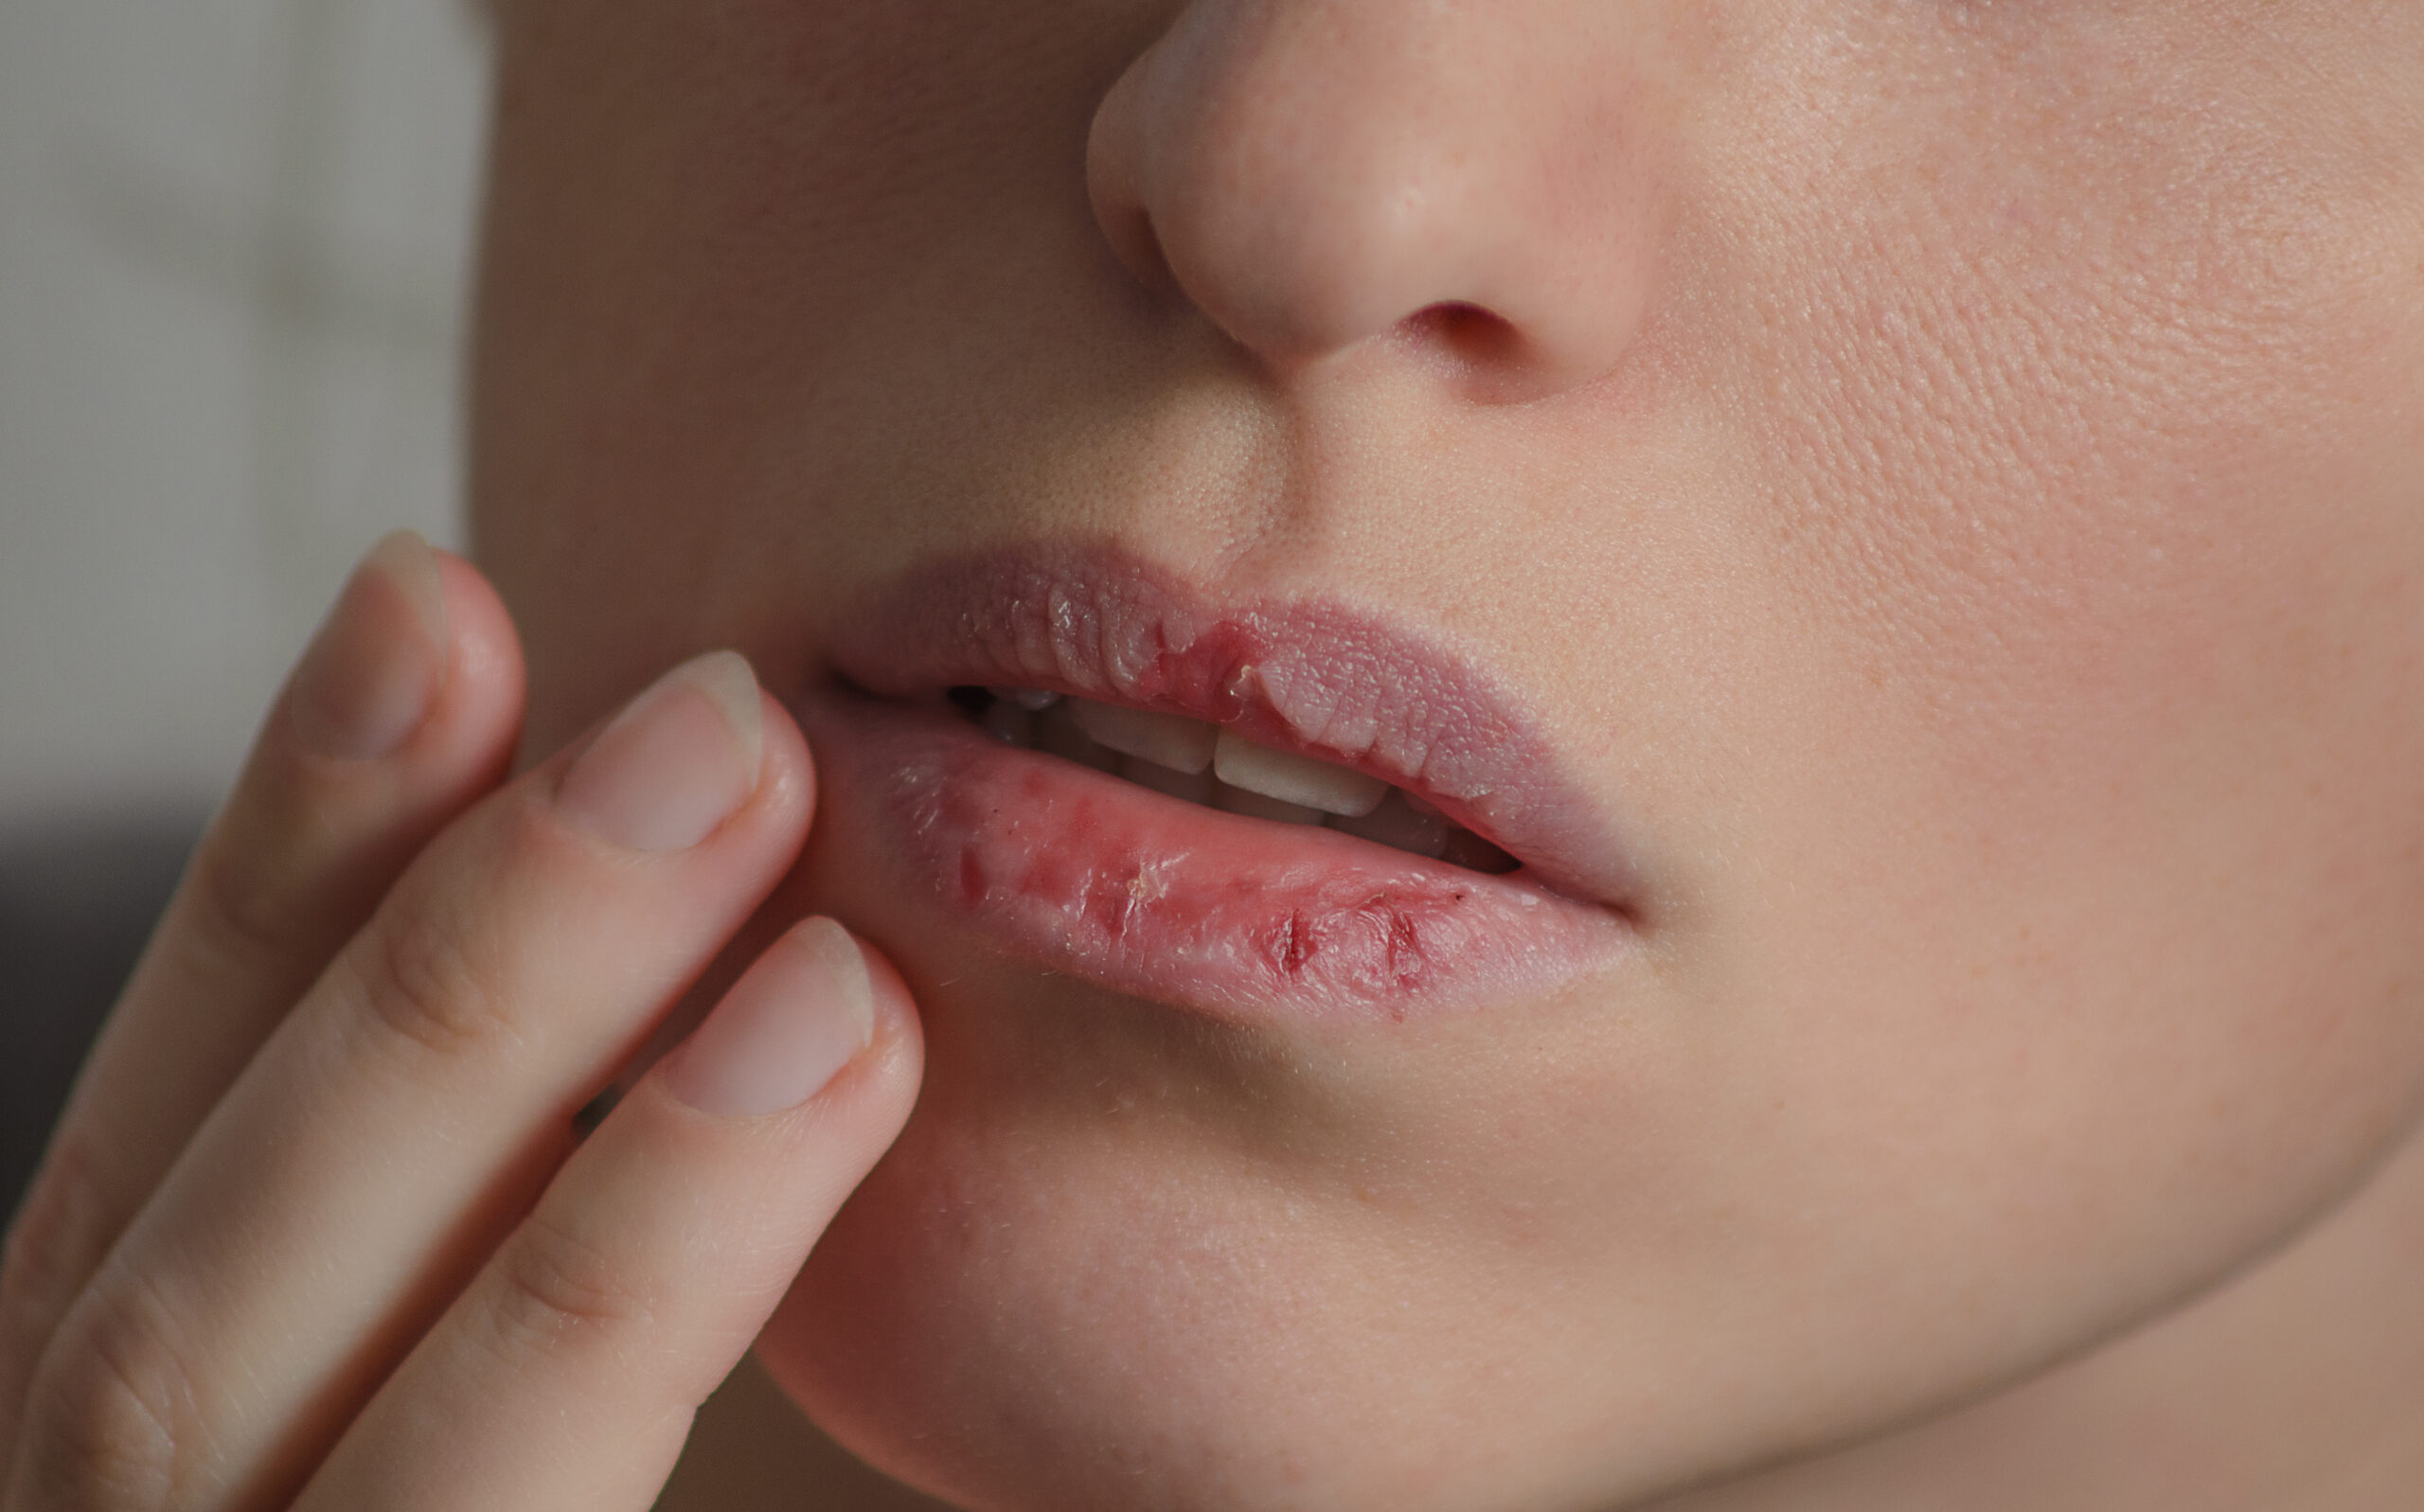 Chapped Lips While it may seem that dry, cracked lips are something you mus...